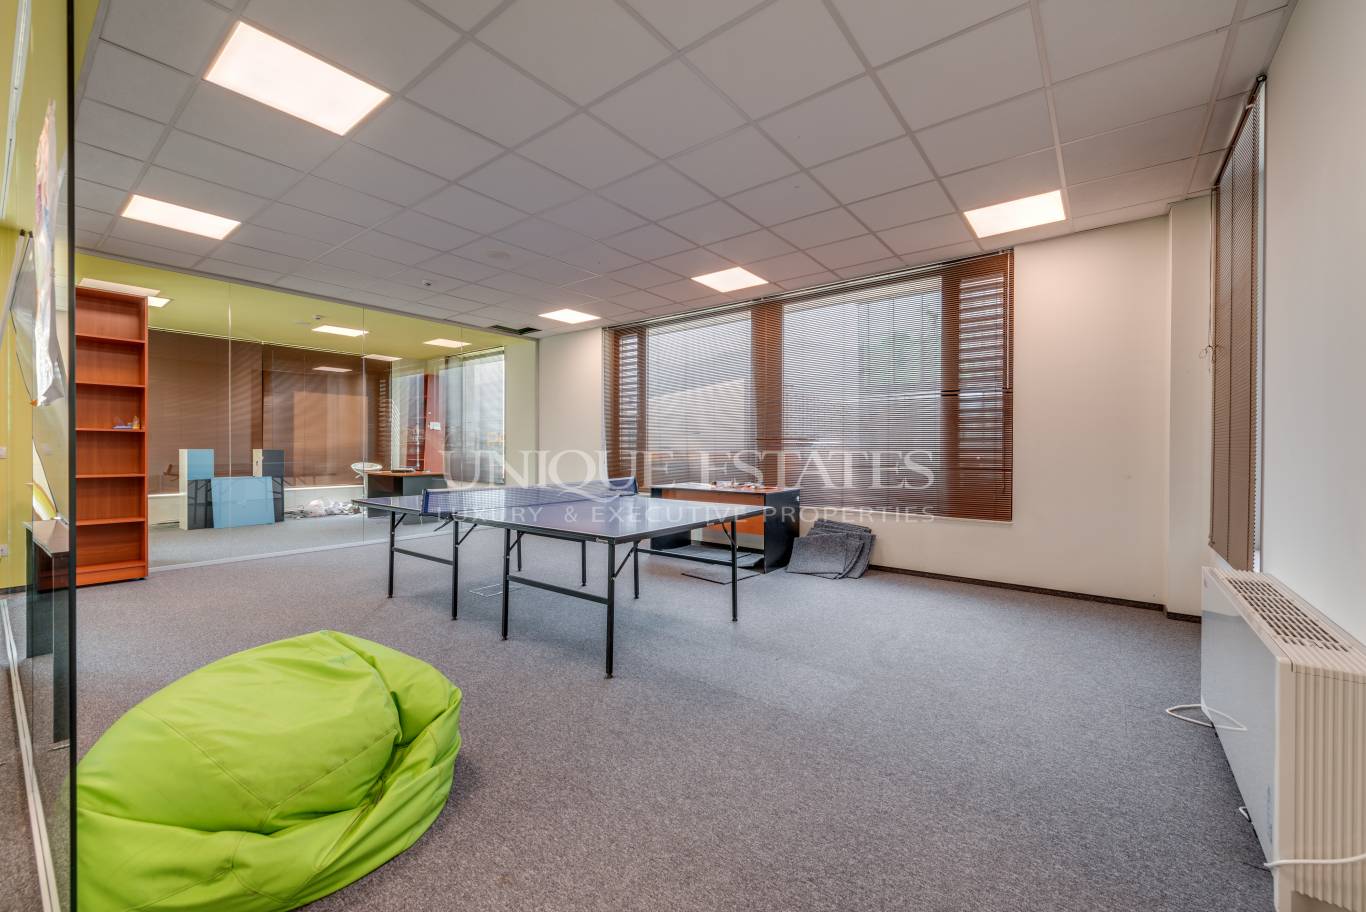 Office for rent in Sofia, Hladilnika with listing ID: K13980 - image 7